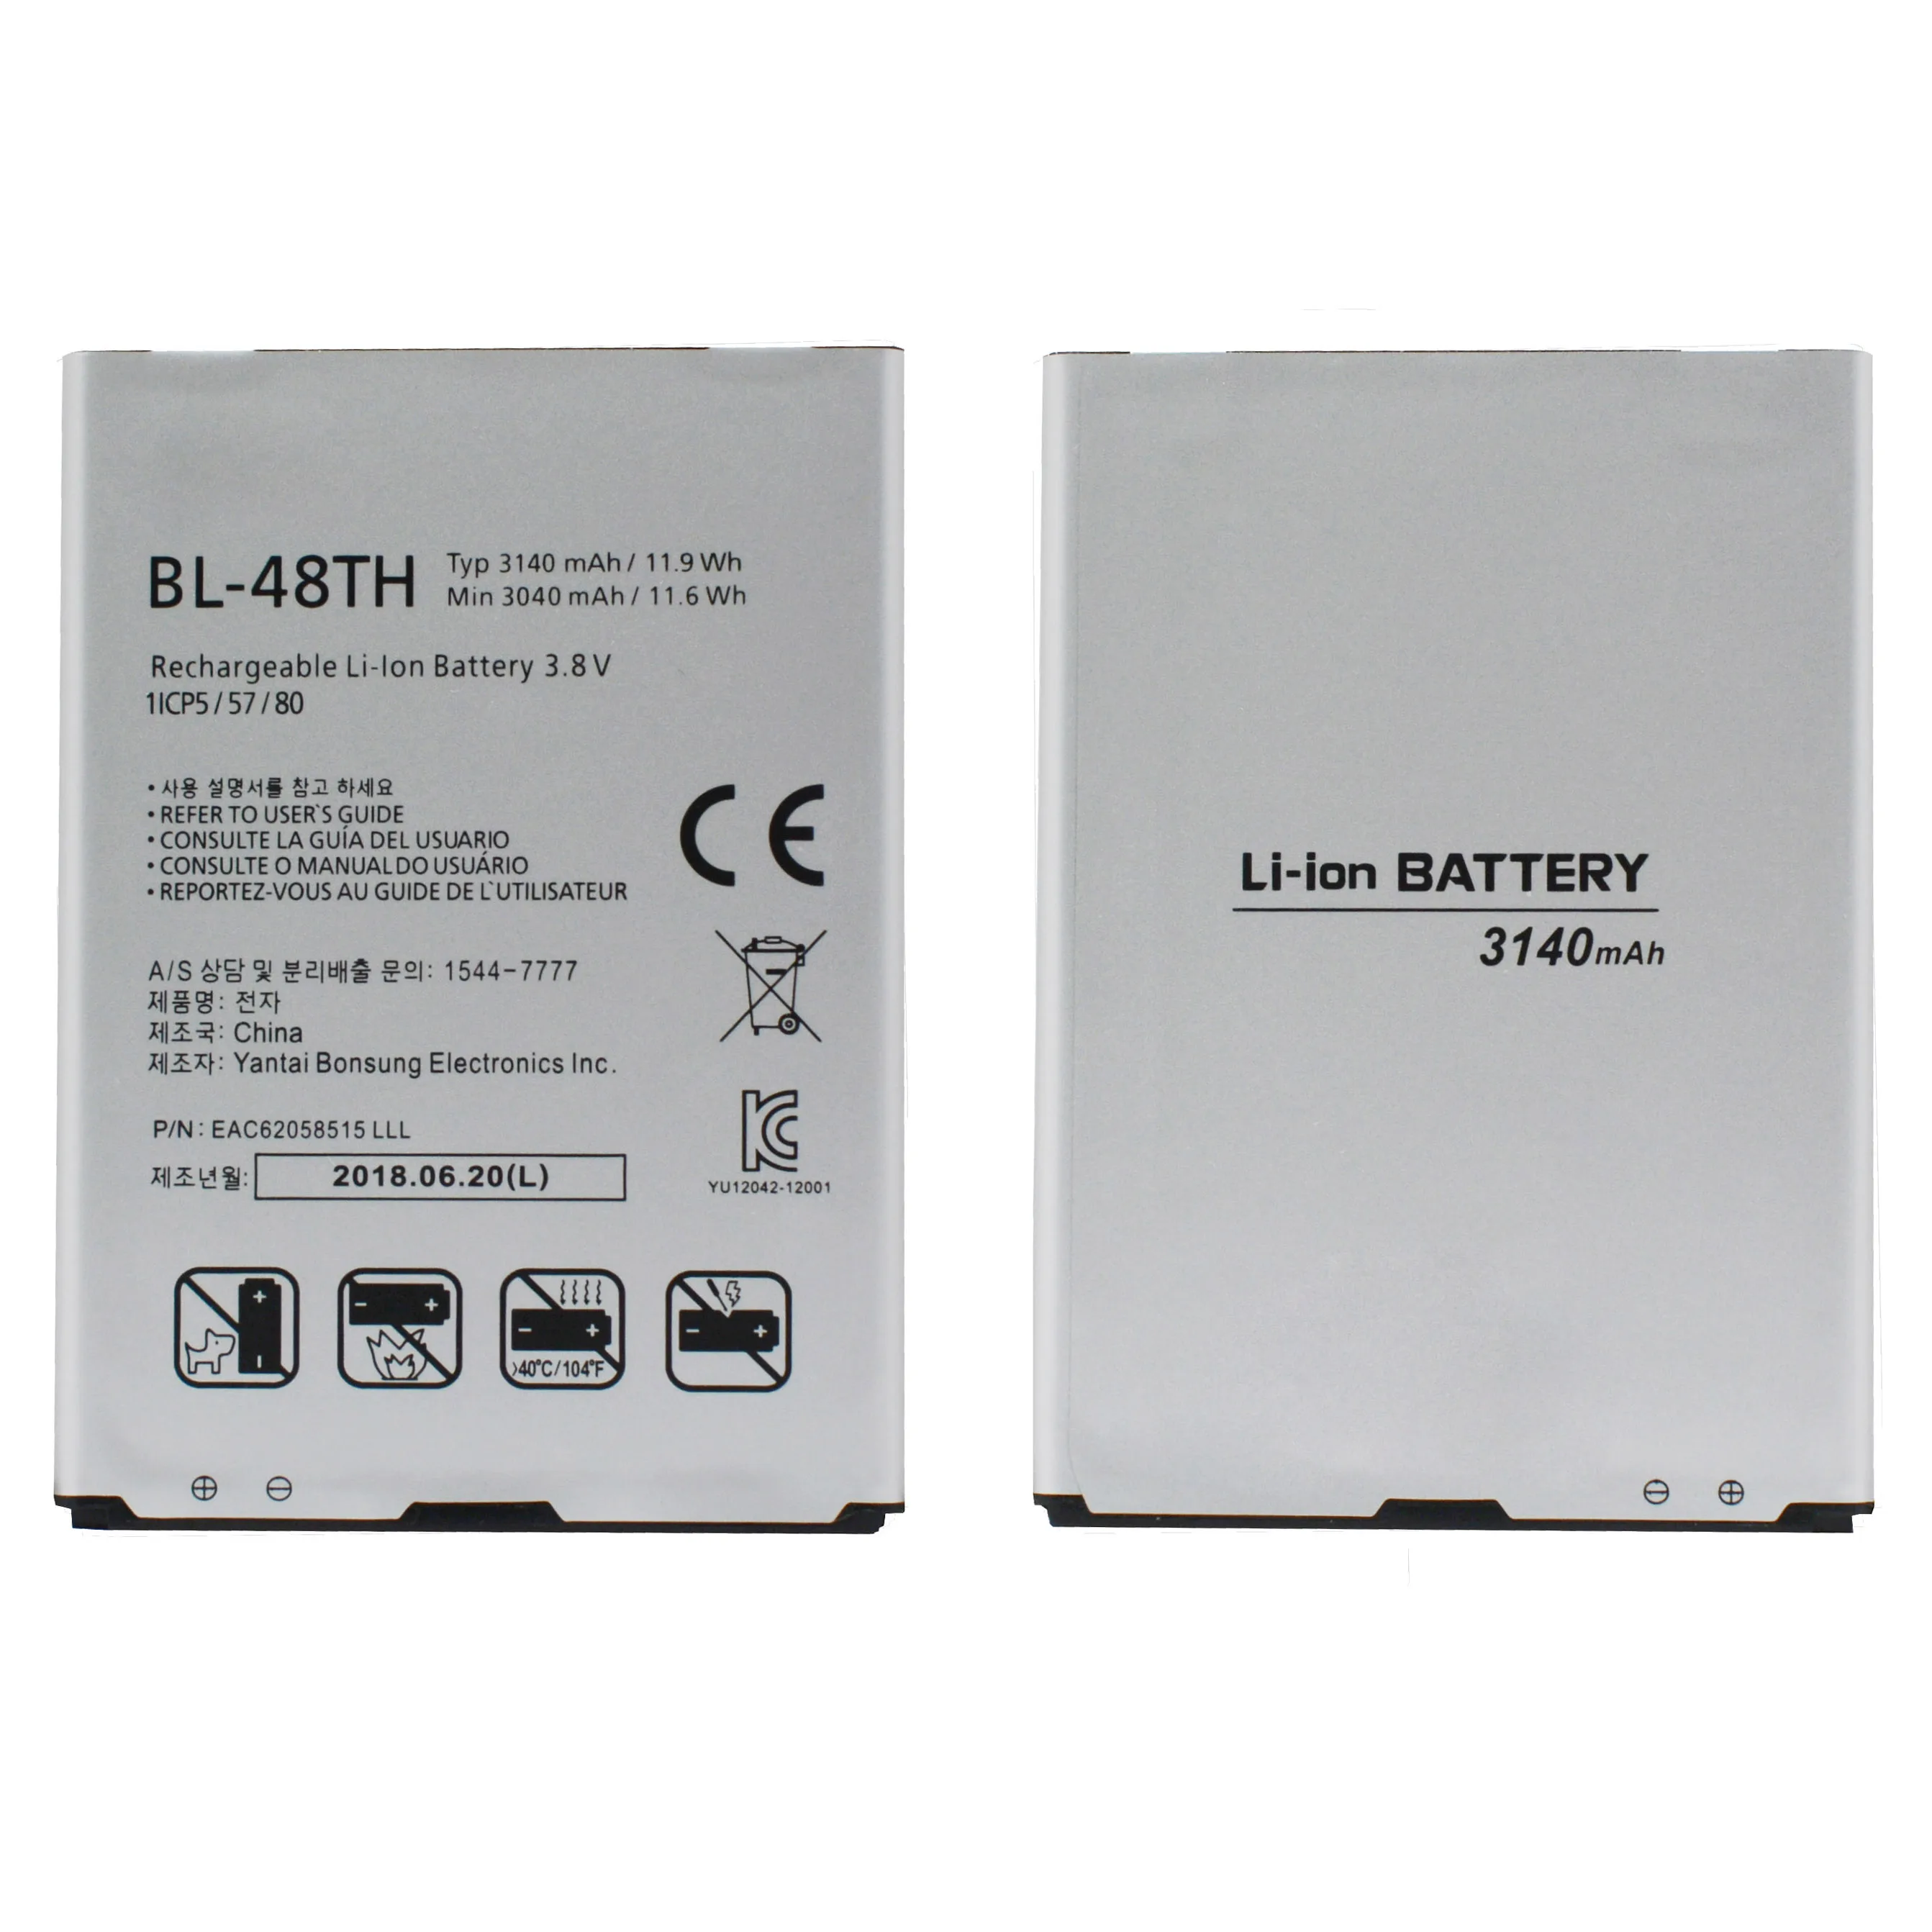 

replacement Li-ion high quality Battery BL-48TH For LG Optimus G Pro Akku DDP service 100% brand-new 3140mAh hot-selling